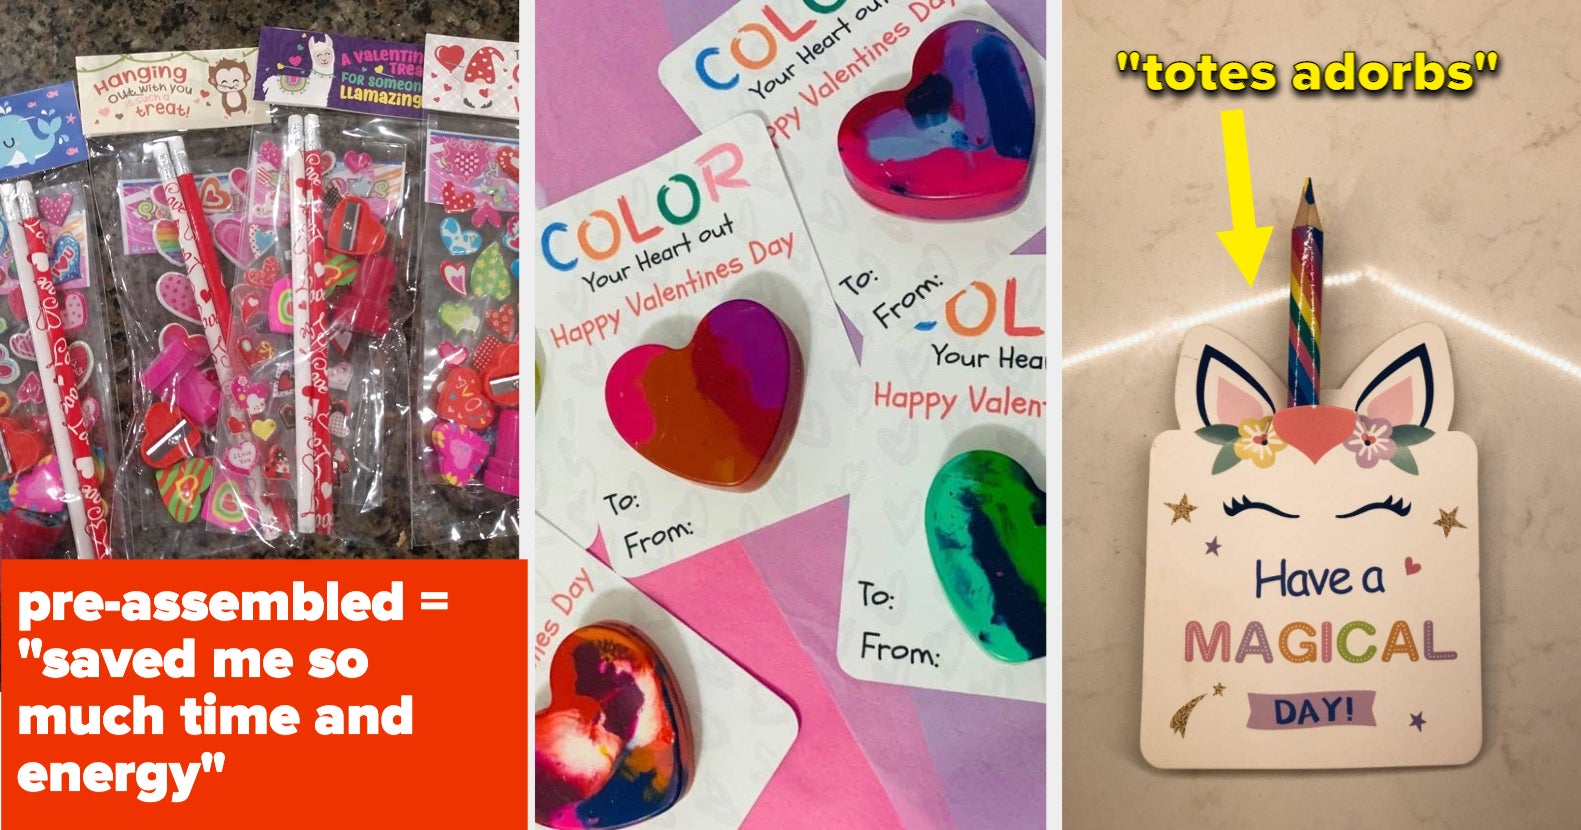 34 Cheap But Cool Valentine's Day Gifts - DIY Projects for Teens